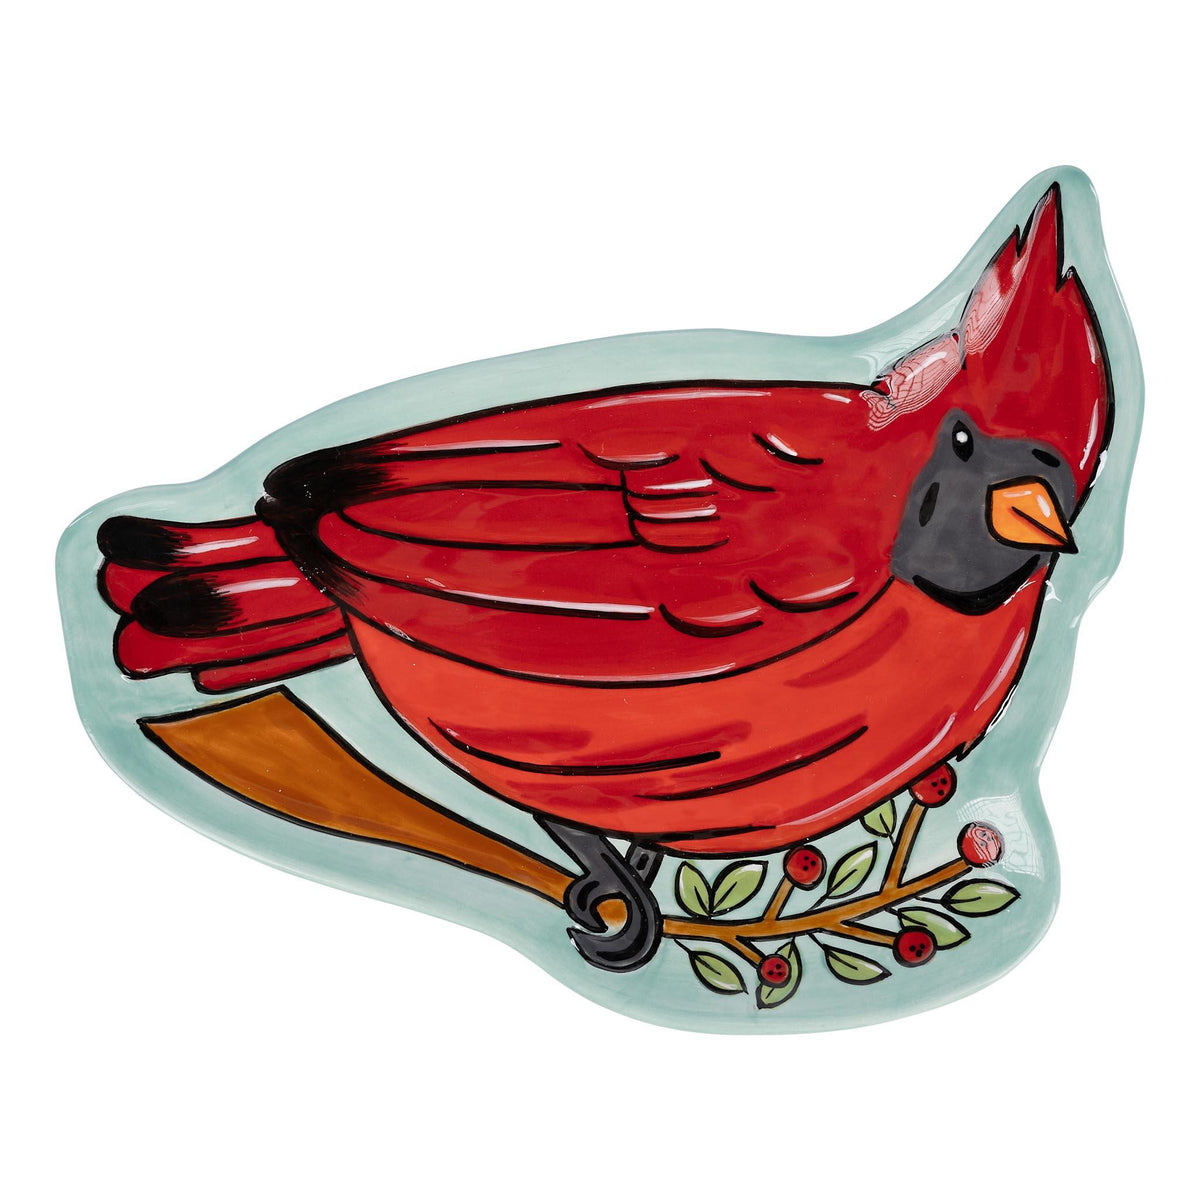 Shop Our Red Bird Trinket Tray with Cardinal Sitting On Branches – GLORY HAUS